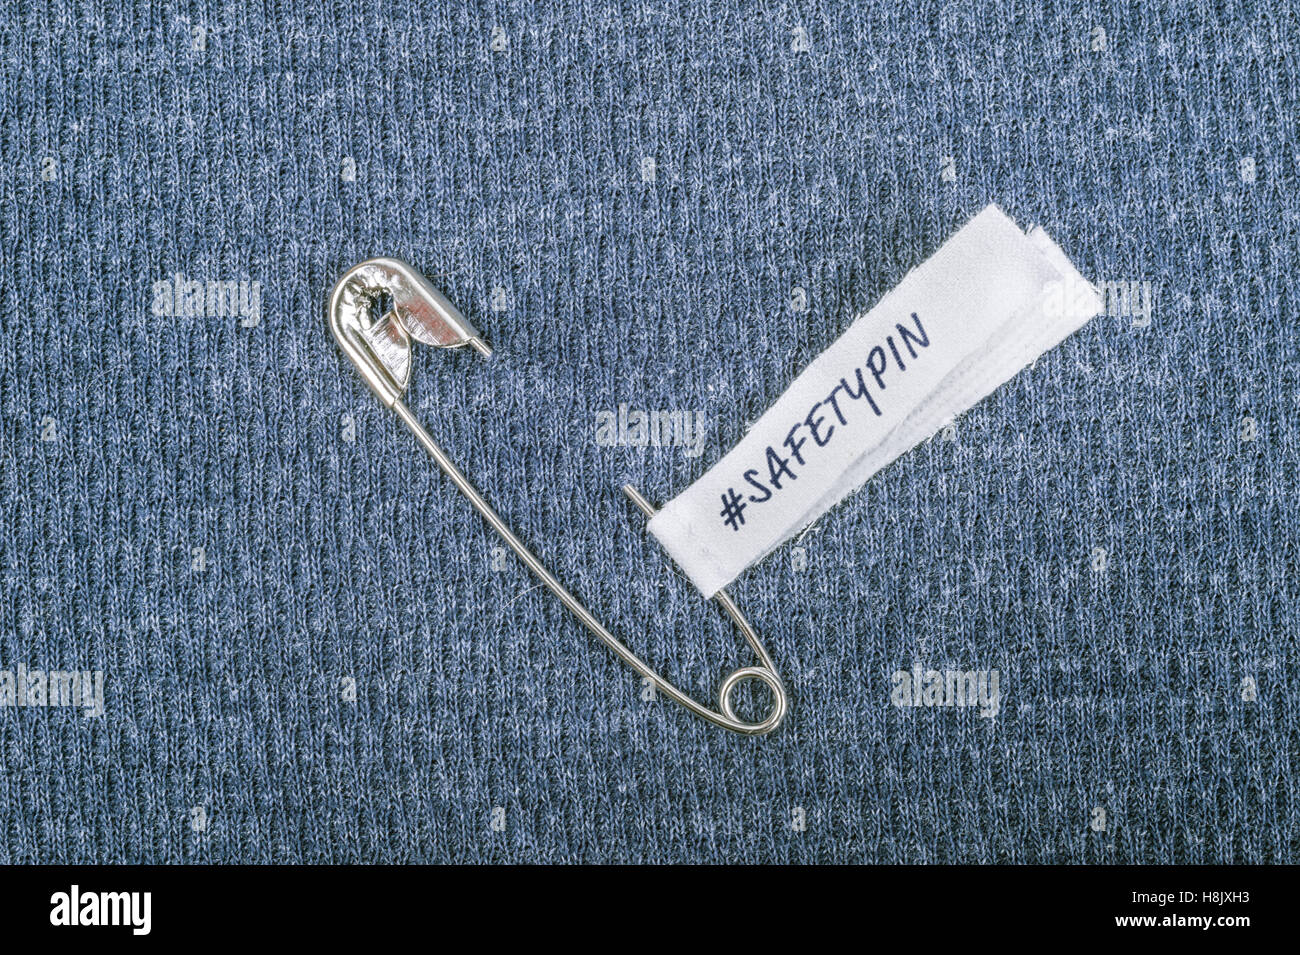 Safety pin on clothes with label #Safetypin as a symbol of